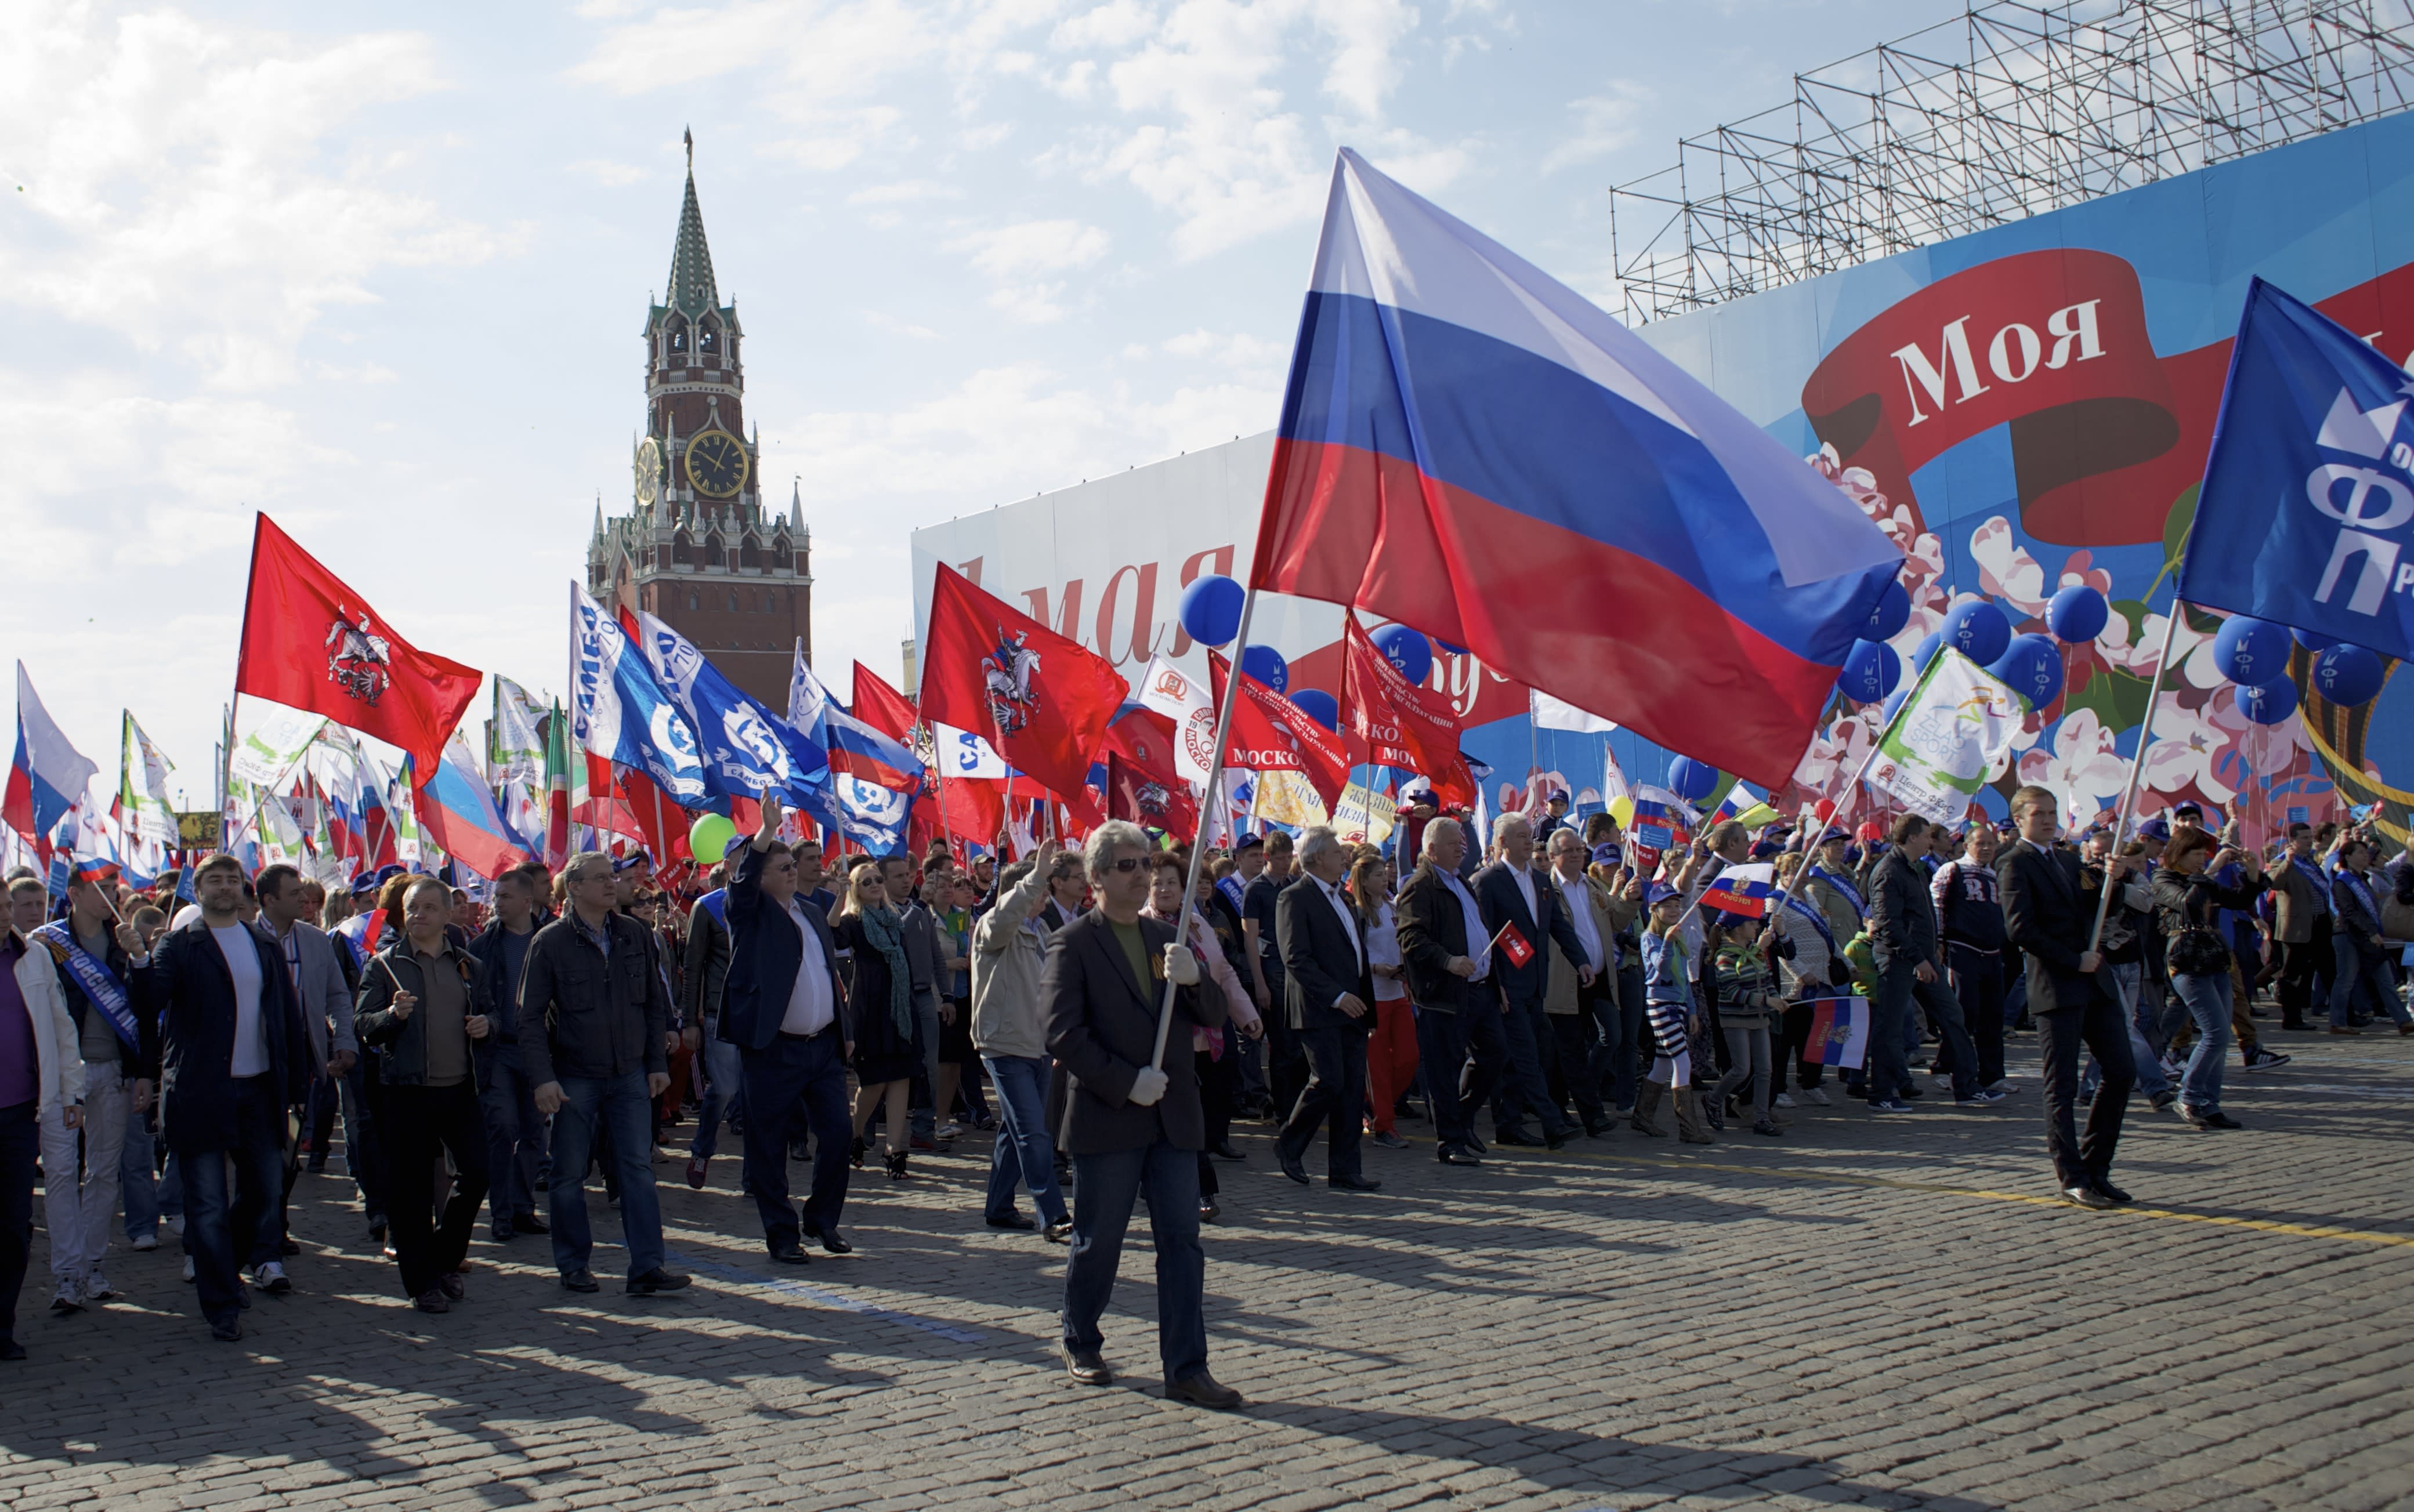 Russia revives May Day tradition to cheer Crimea